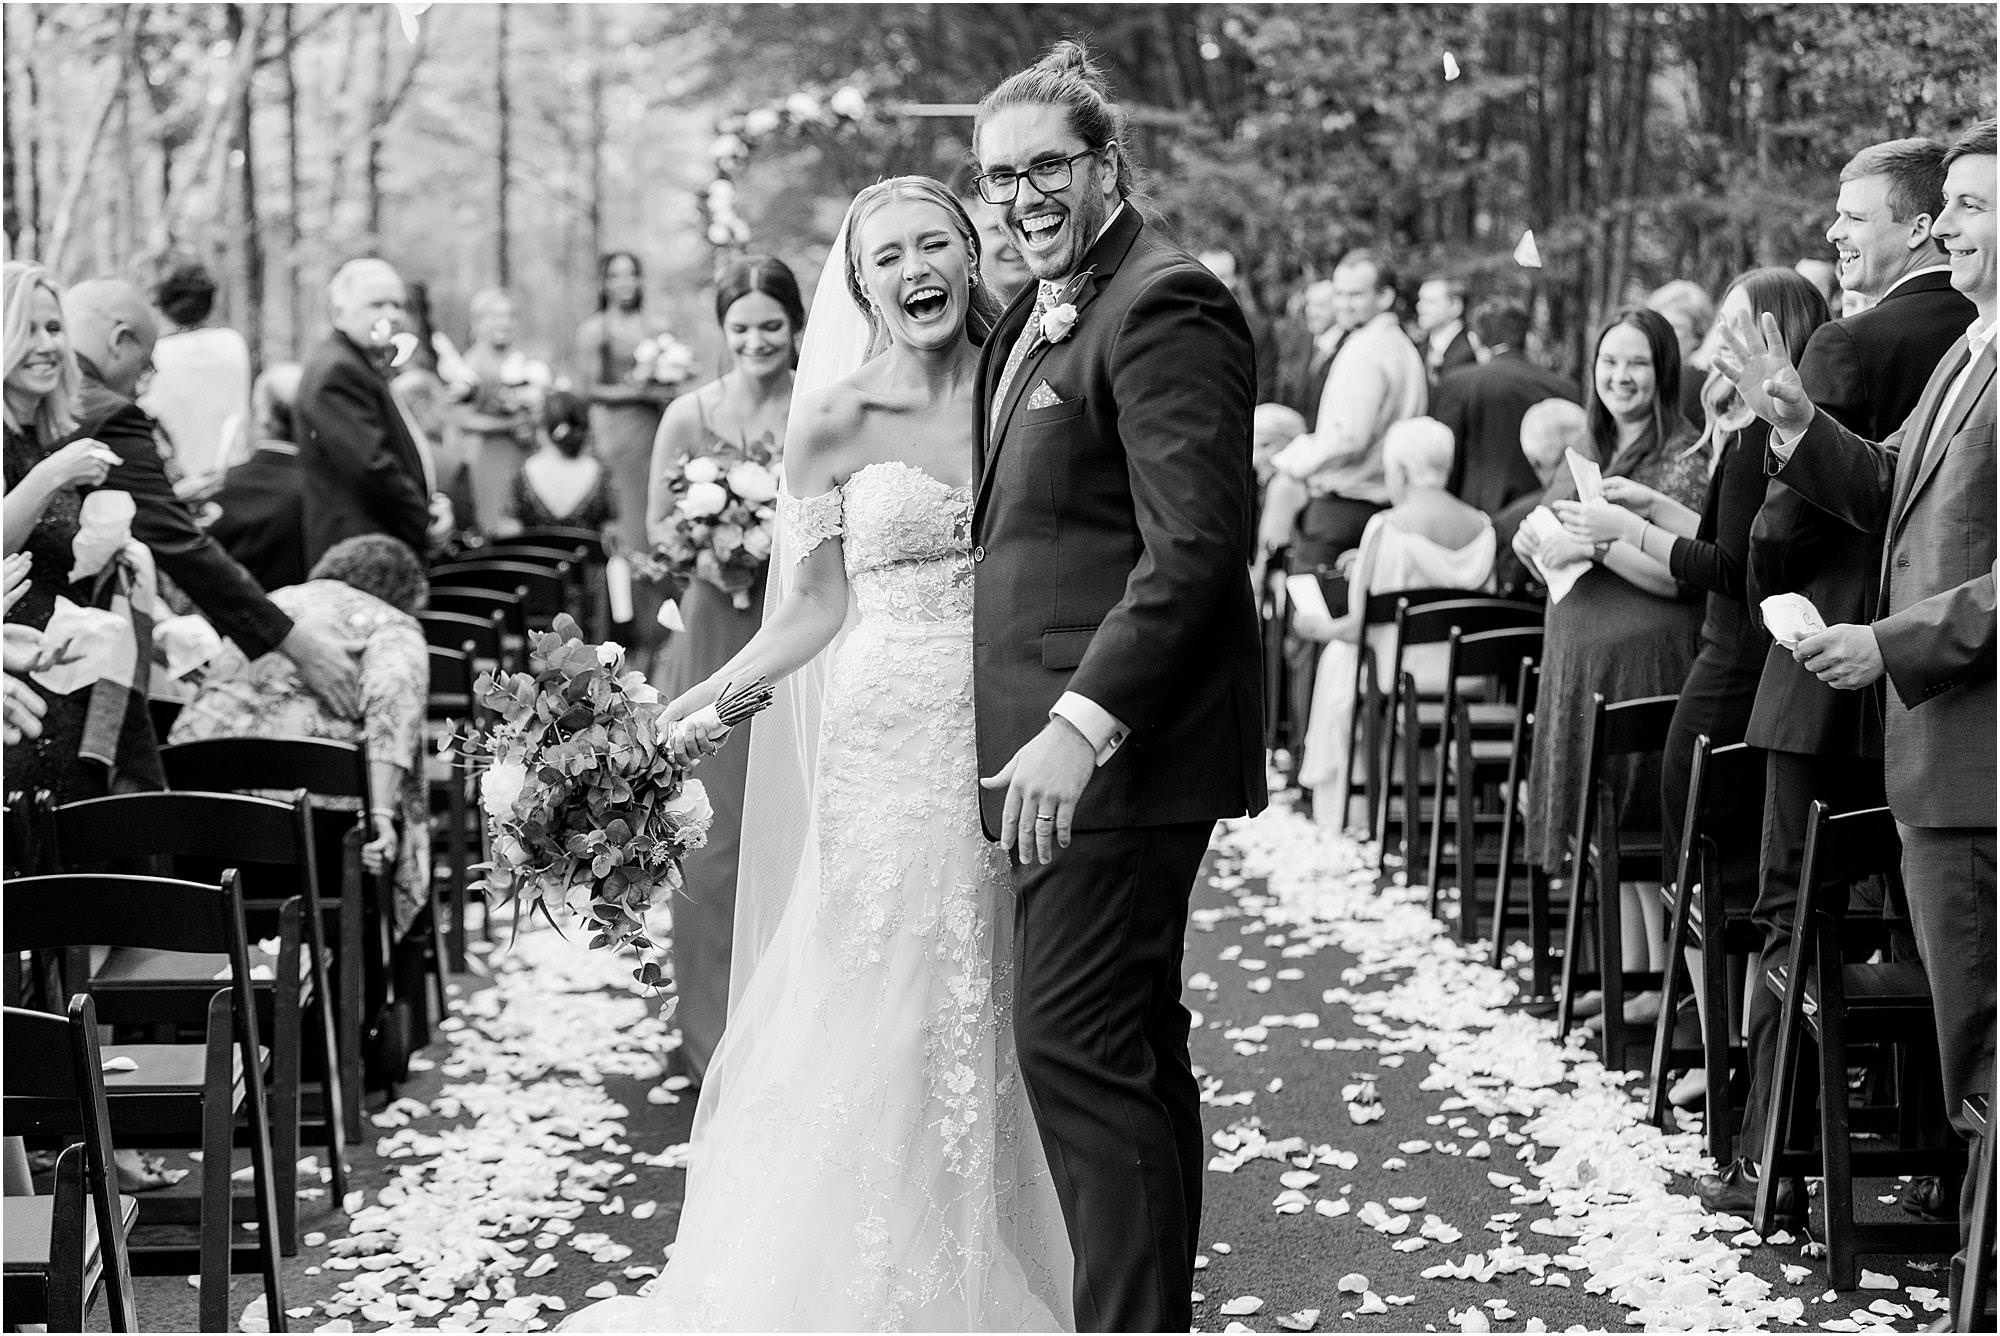 Bride and groom smiling at the end of the aisle after their recessional